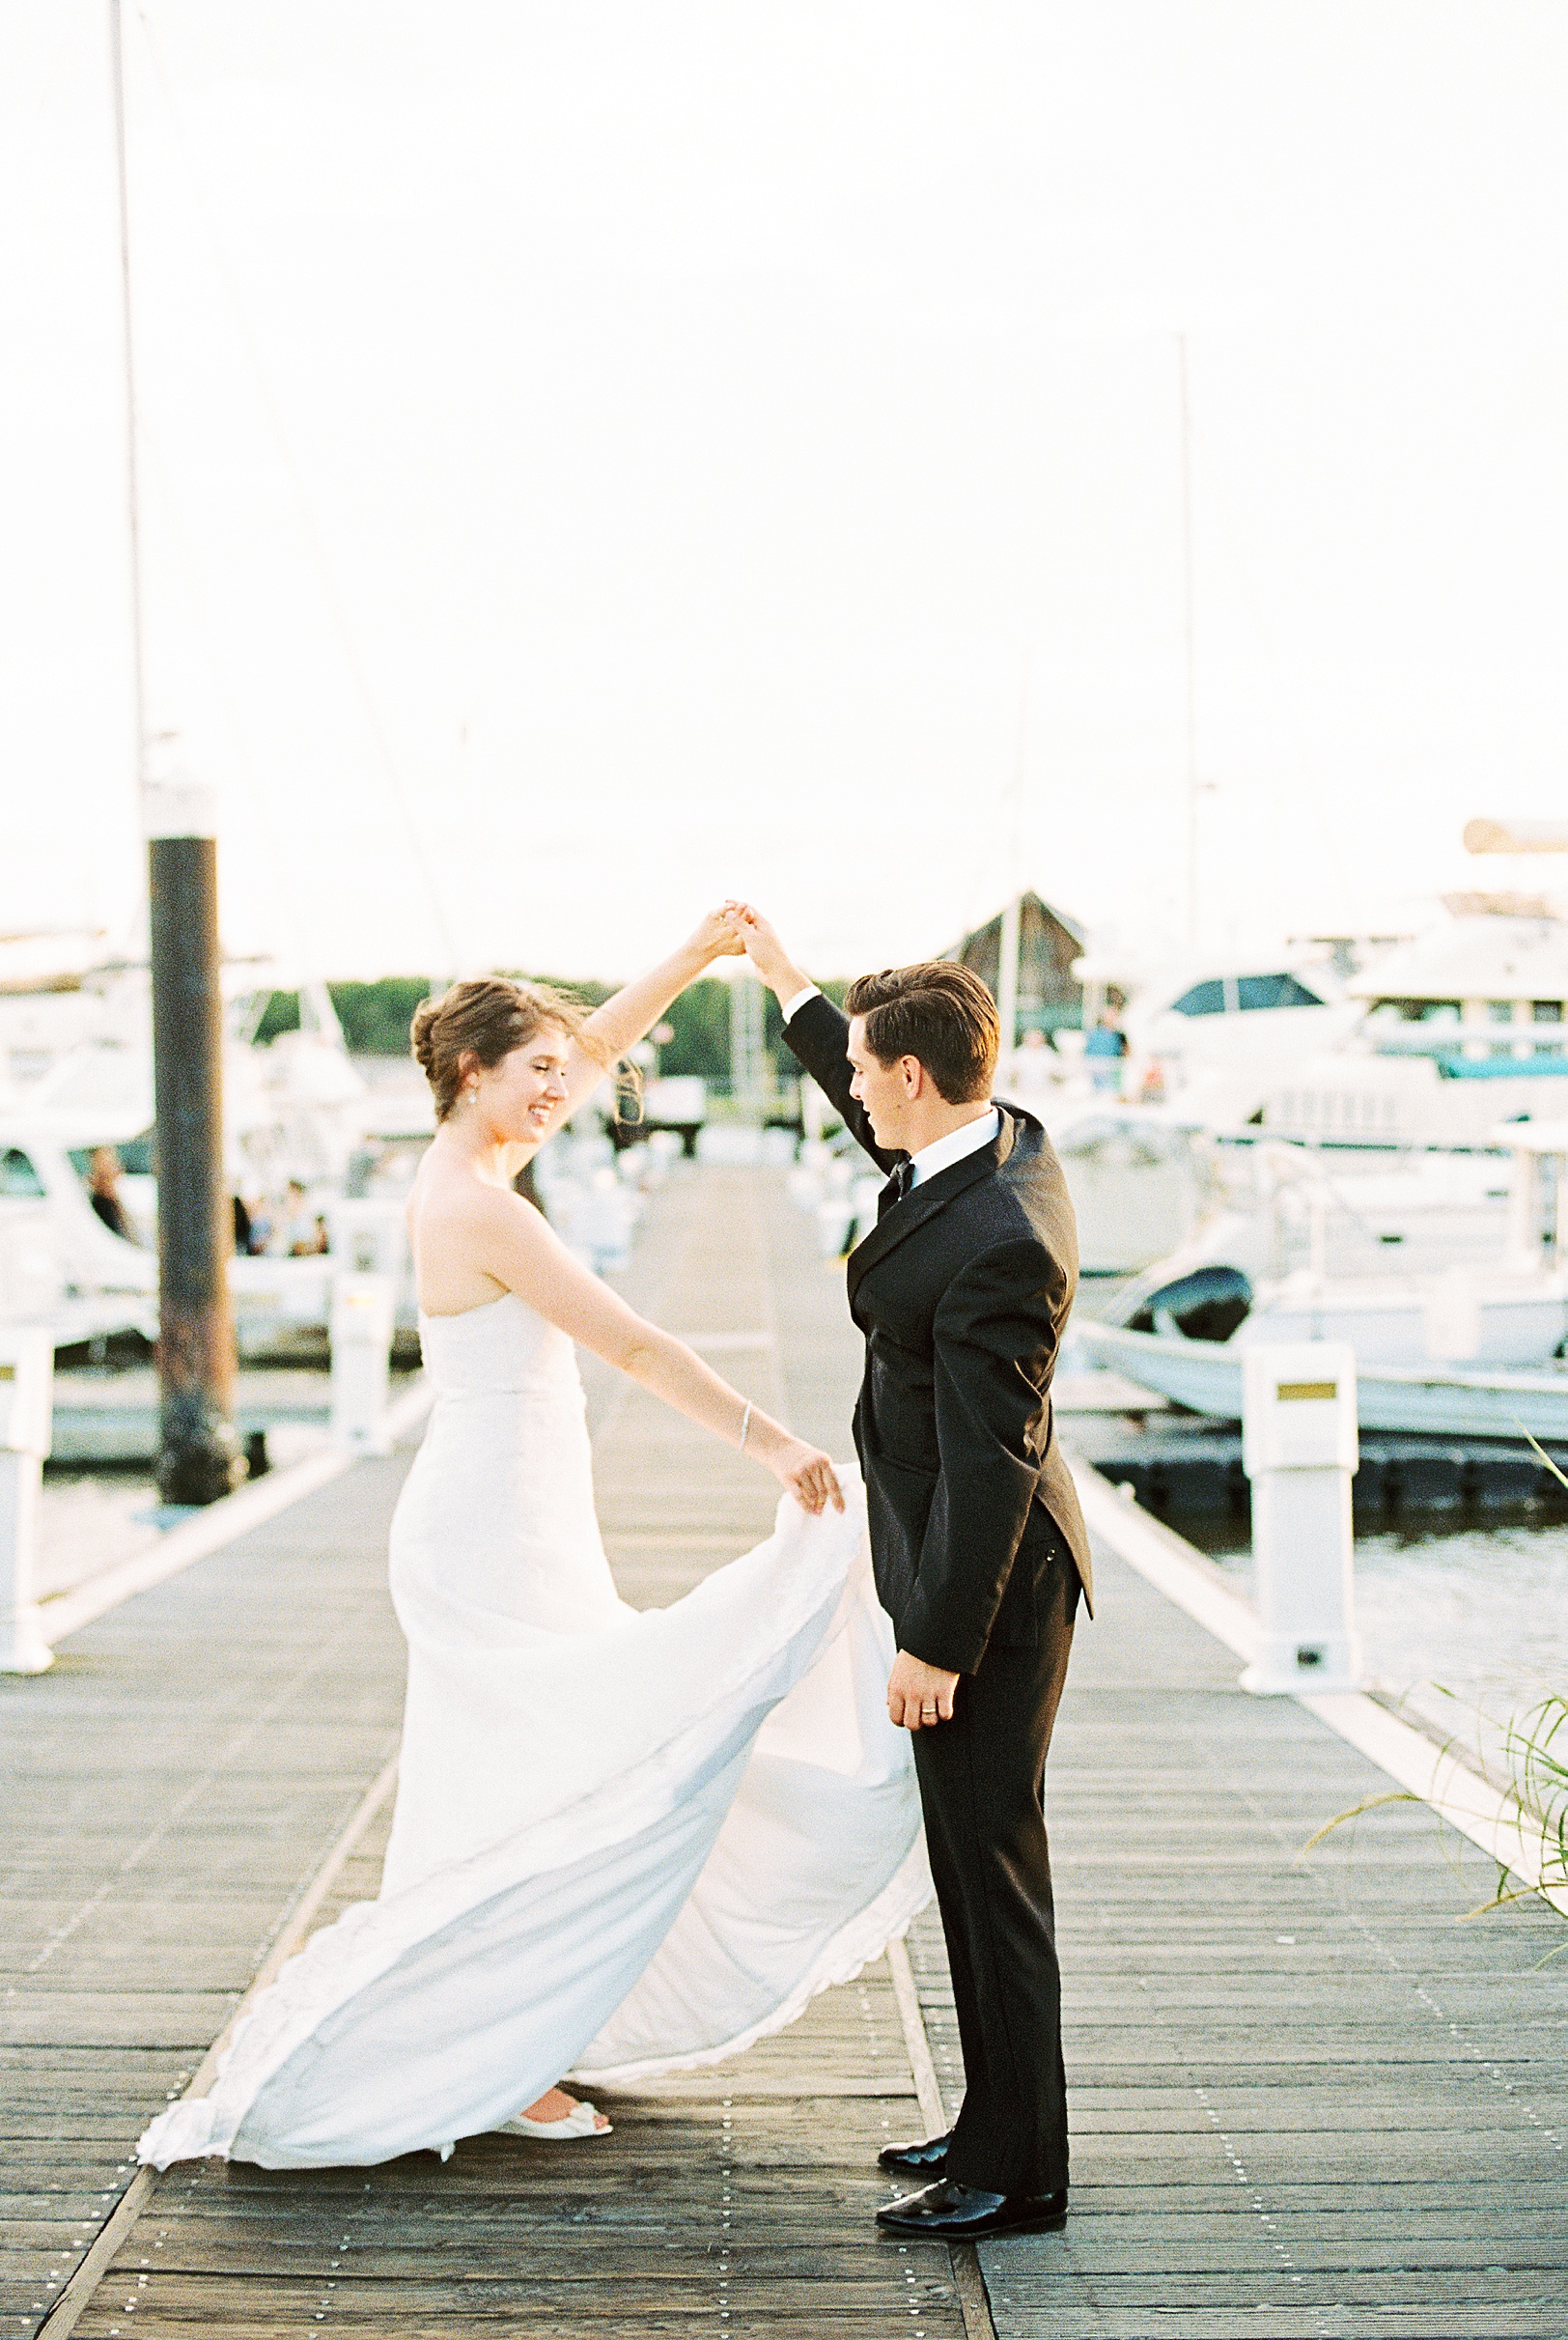 Bride and Groom dance by boats at Charleston Marina | Kaitlin Scott Photography